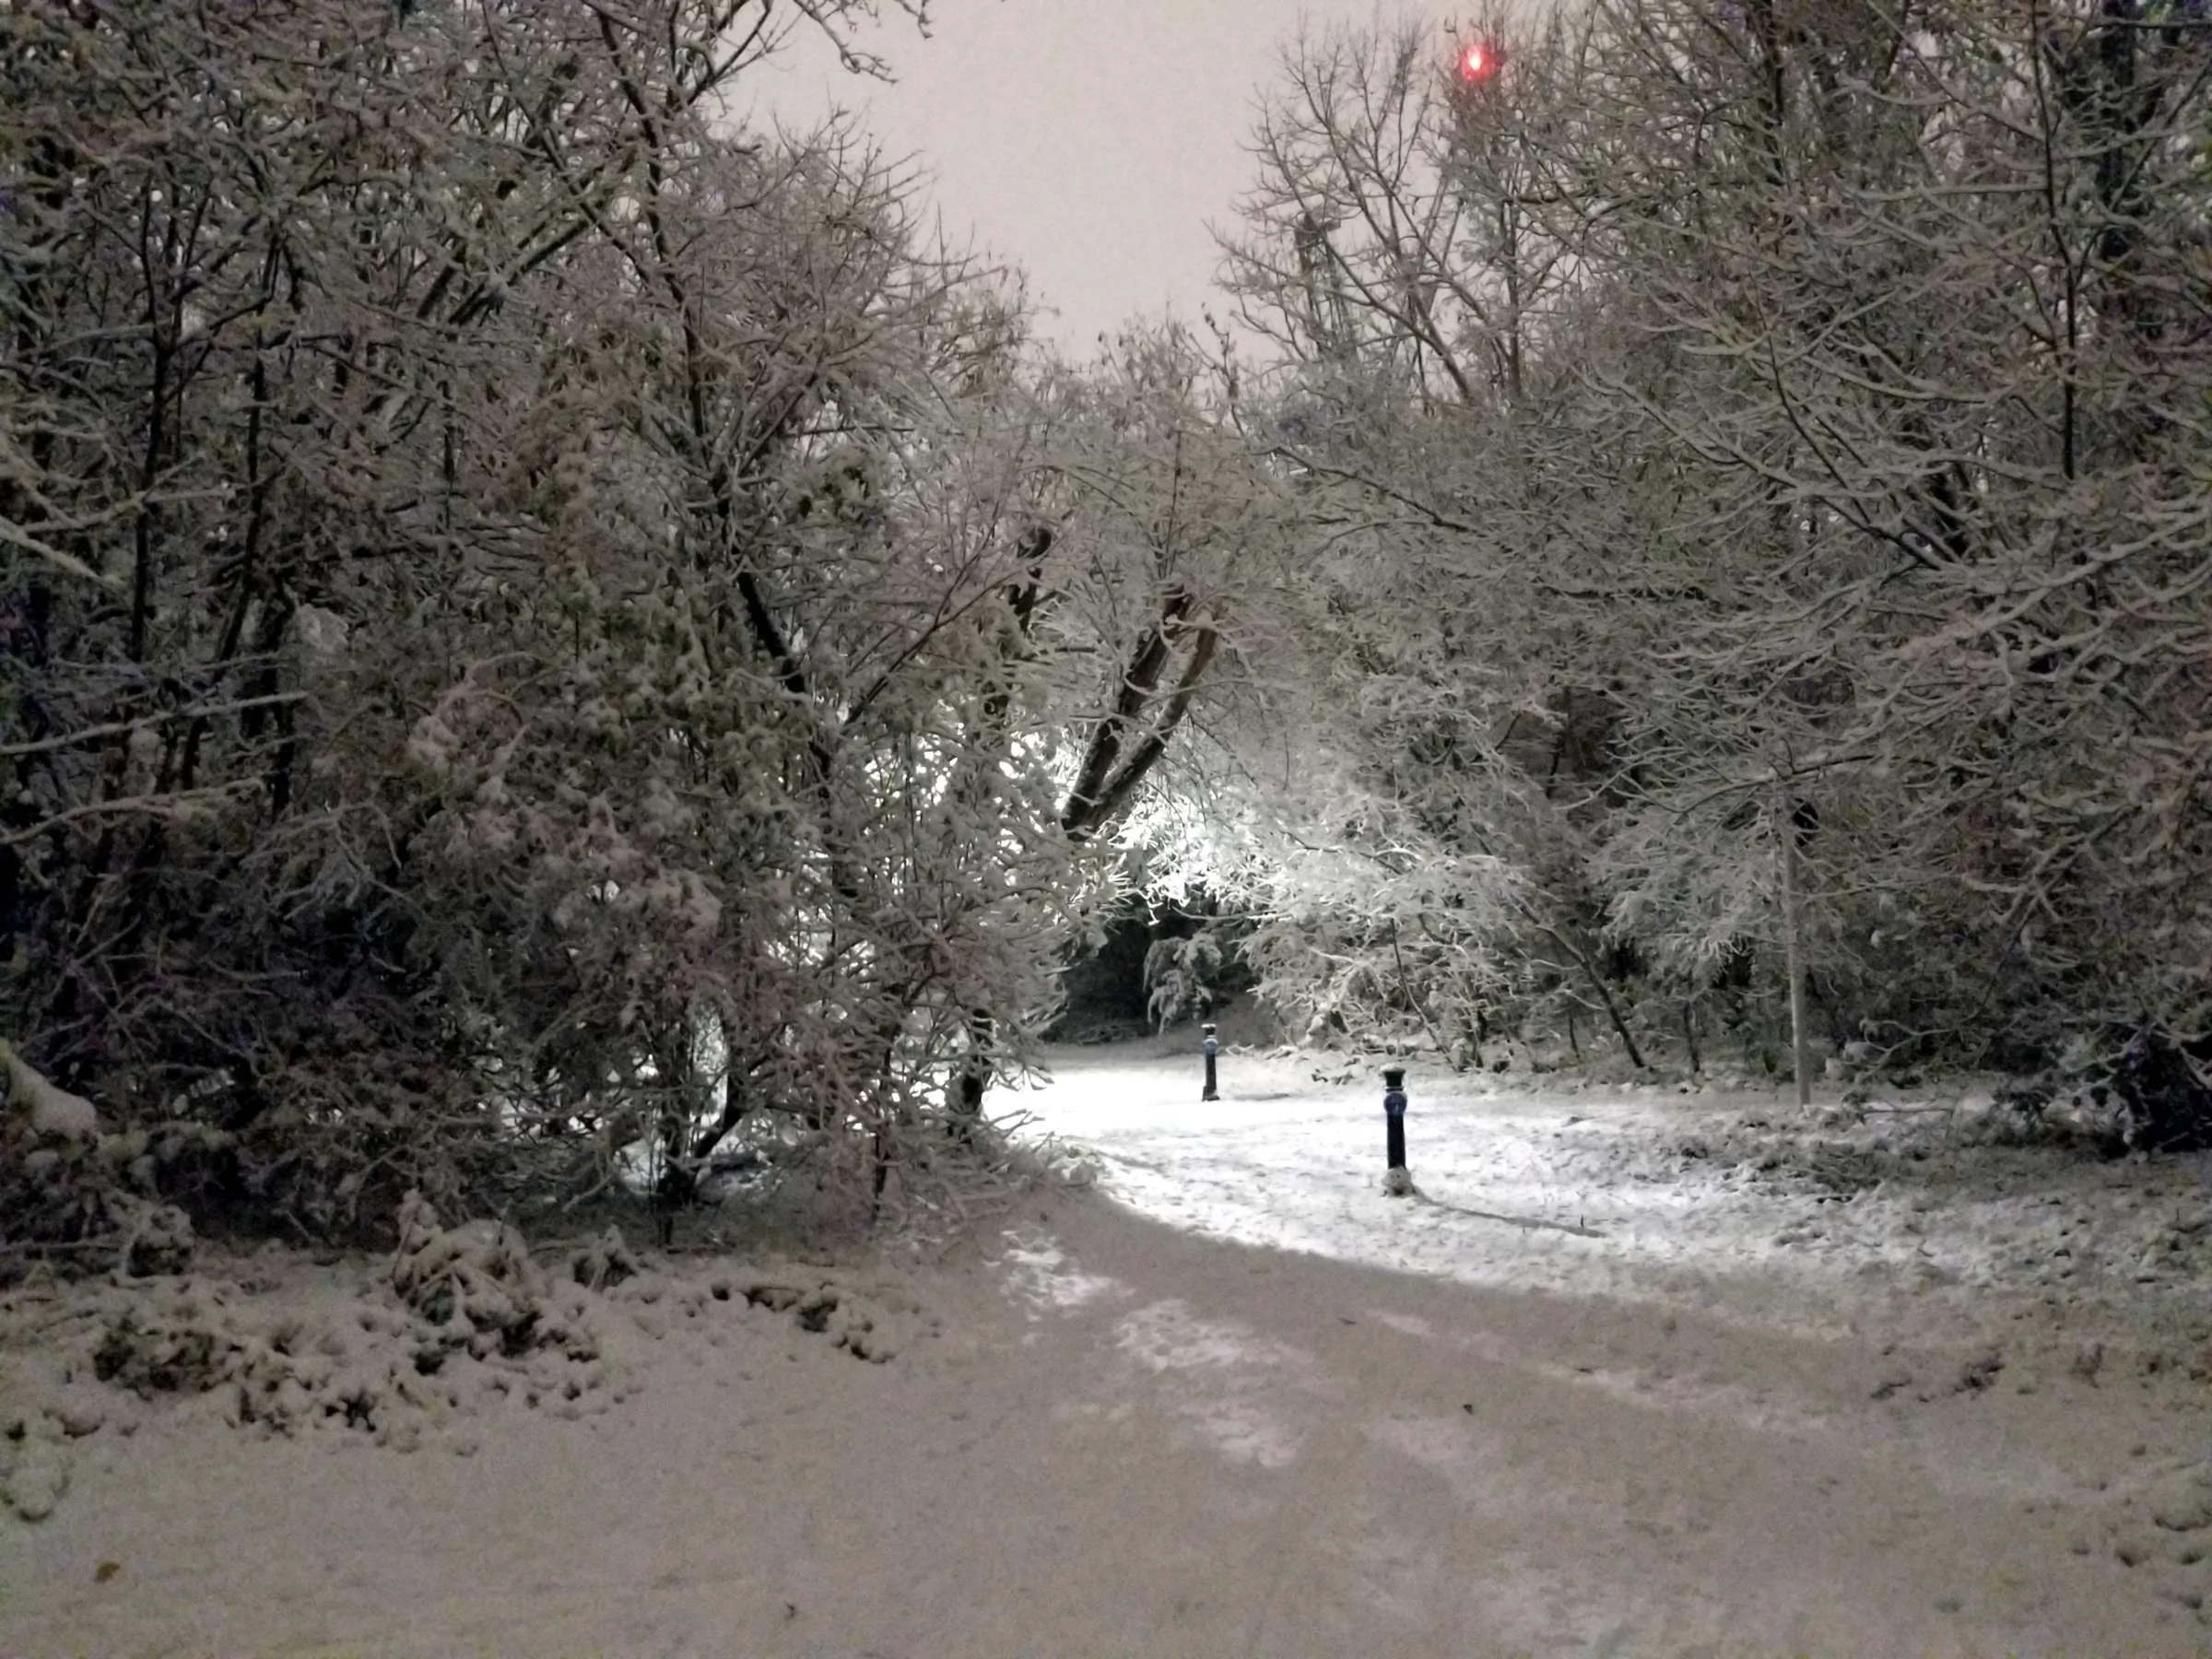 A cycle- and footpath through some trees. Everything is covered in a thick
layer of snow, and the sky is unusually light for the nighttime